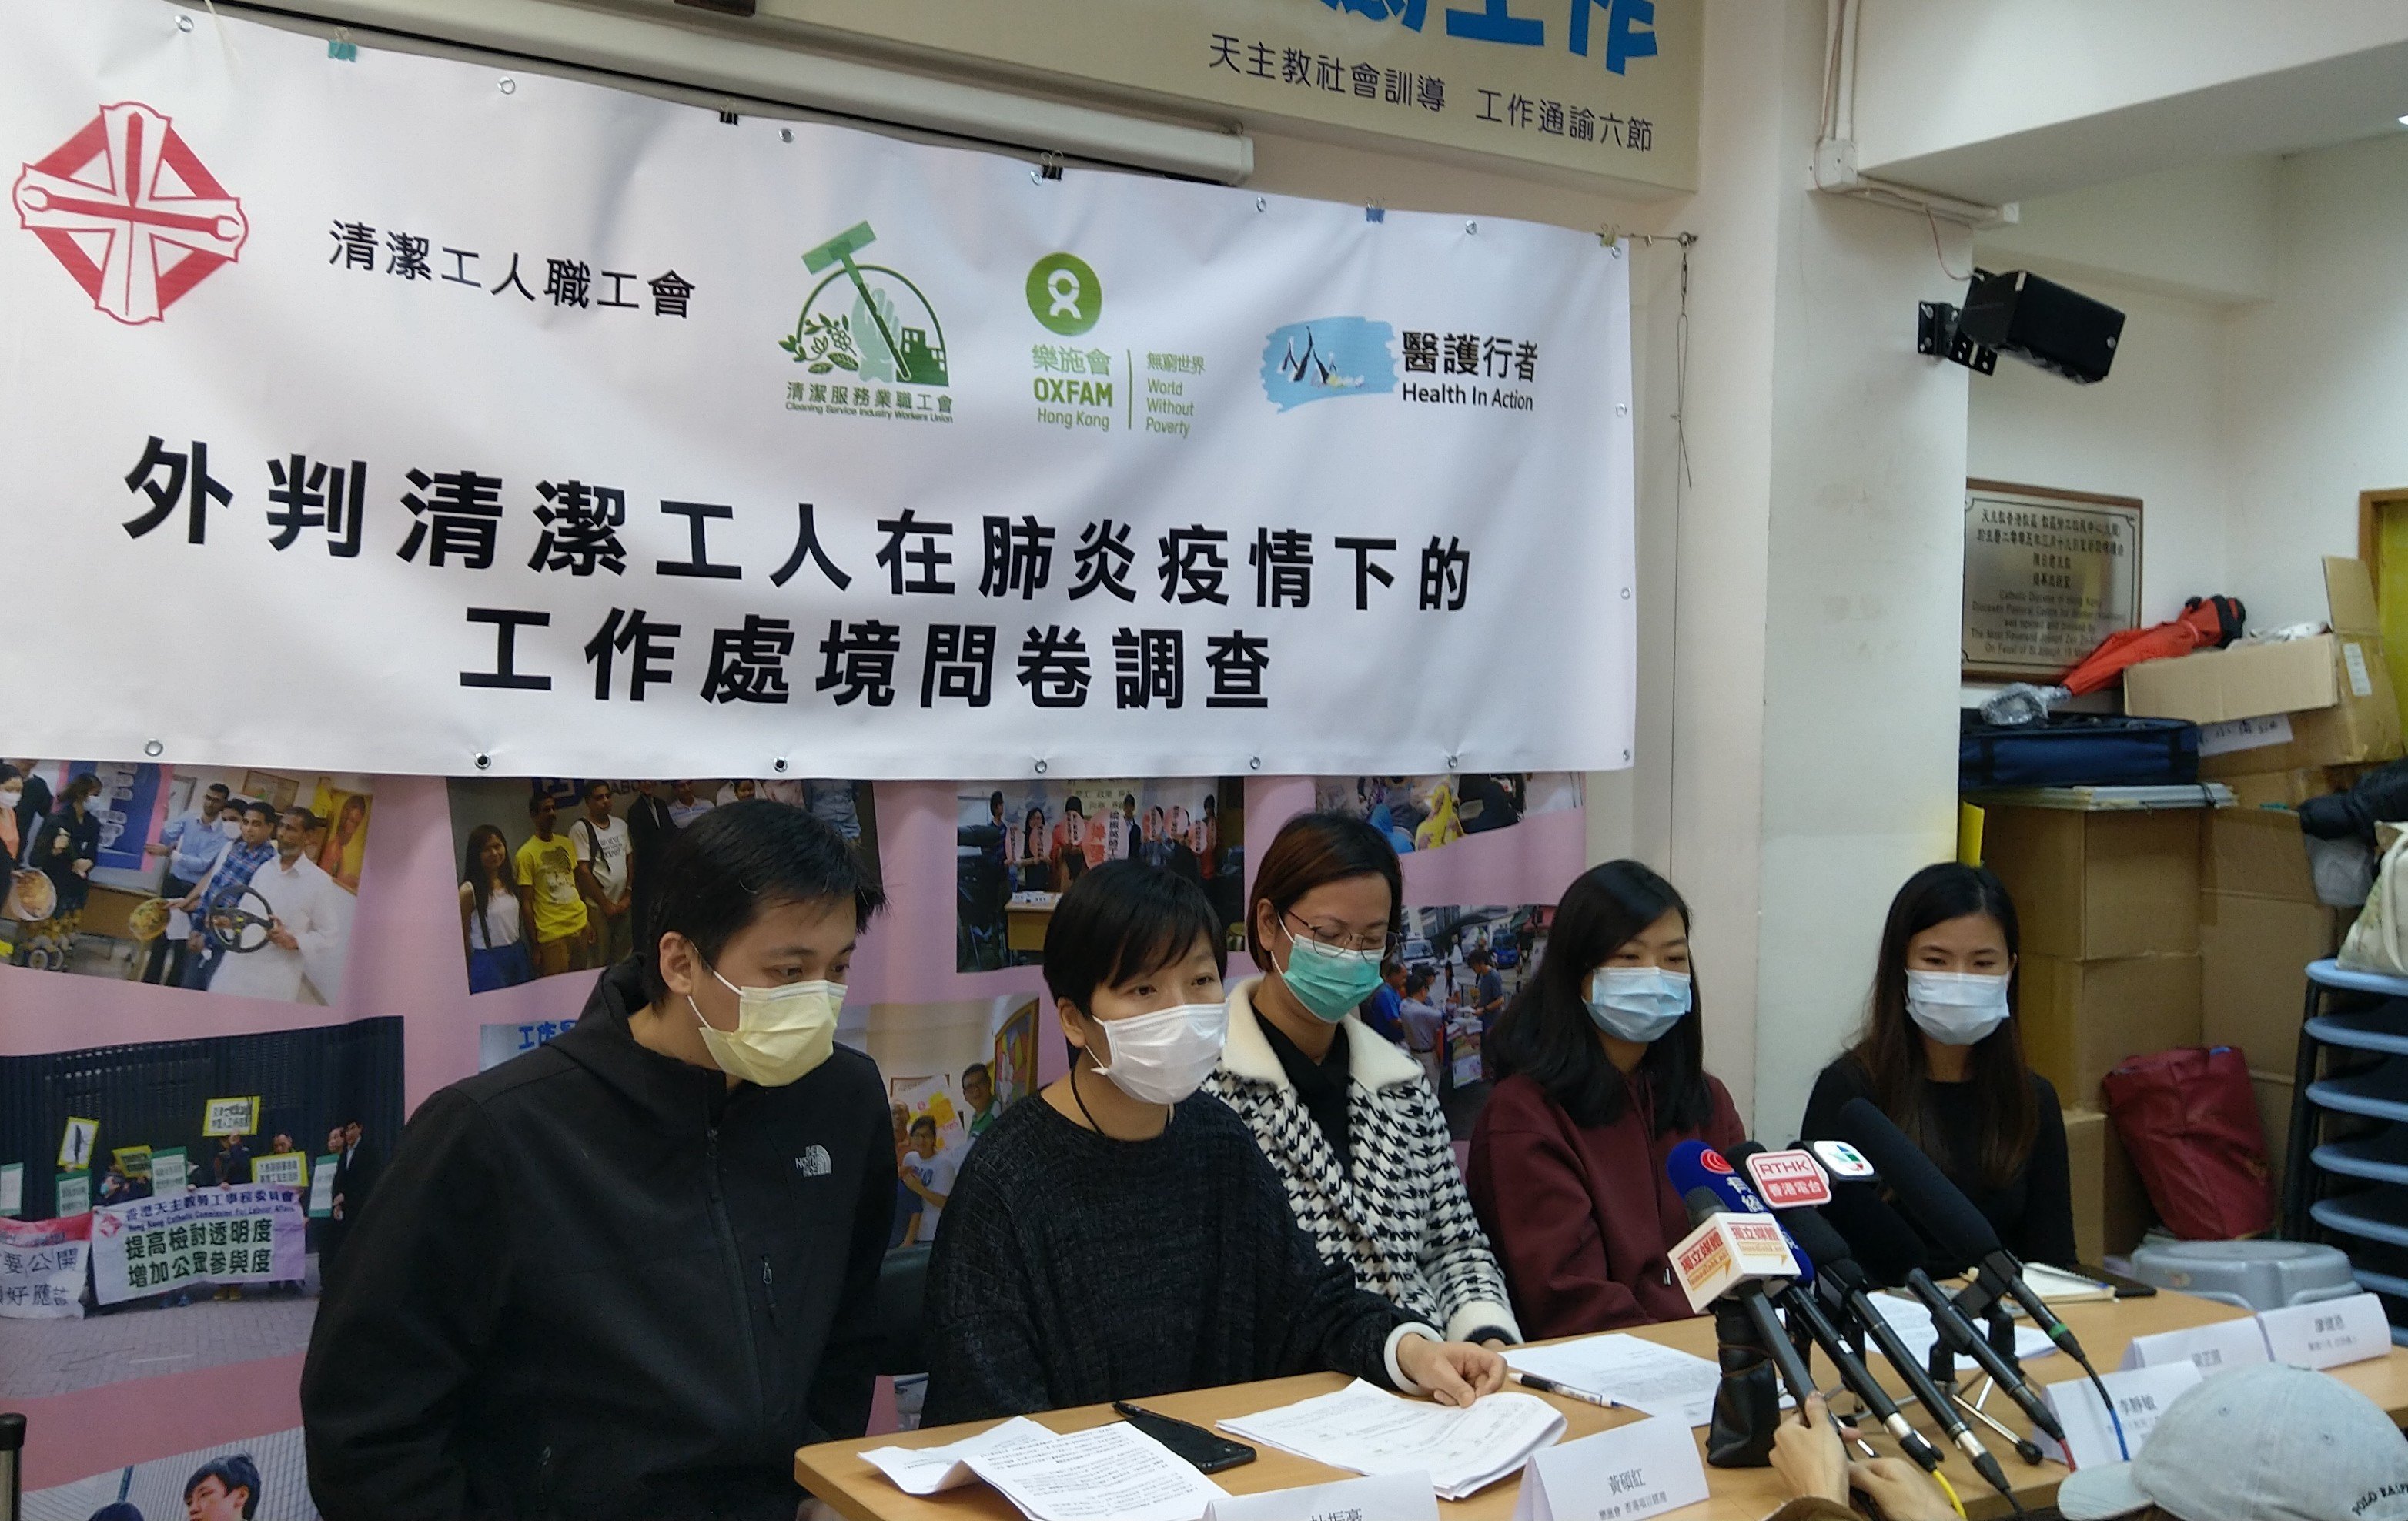 Oxfam Hong Kong and partner organisations announced the findings of our survey ‘Survey on Outsourced Workers and Their Working Conditions Amidst COVID-19’ at our joint press conference on 18 February 2020.